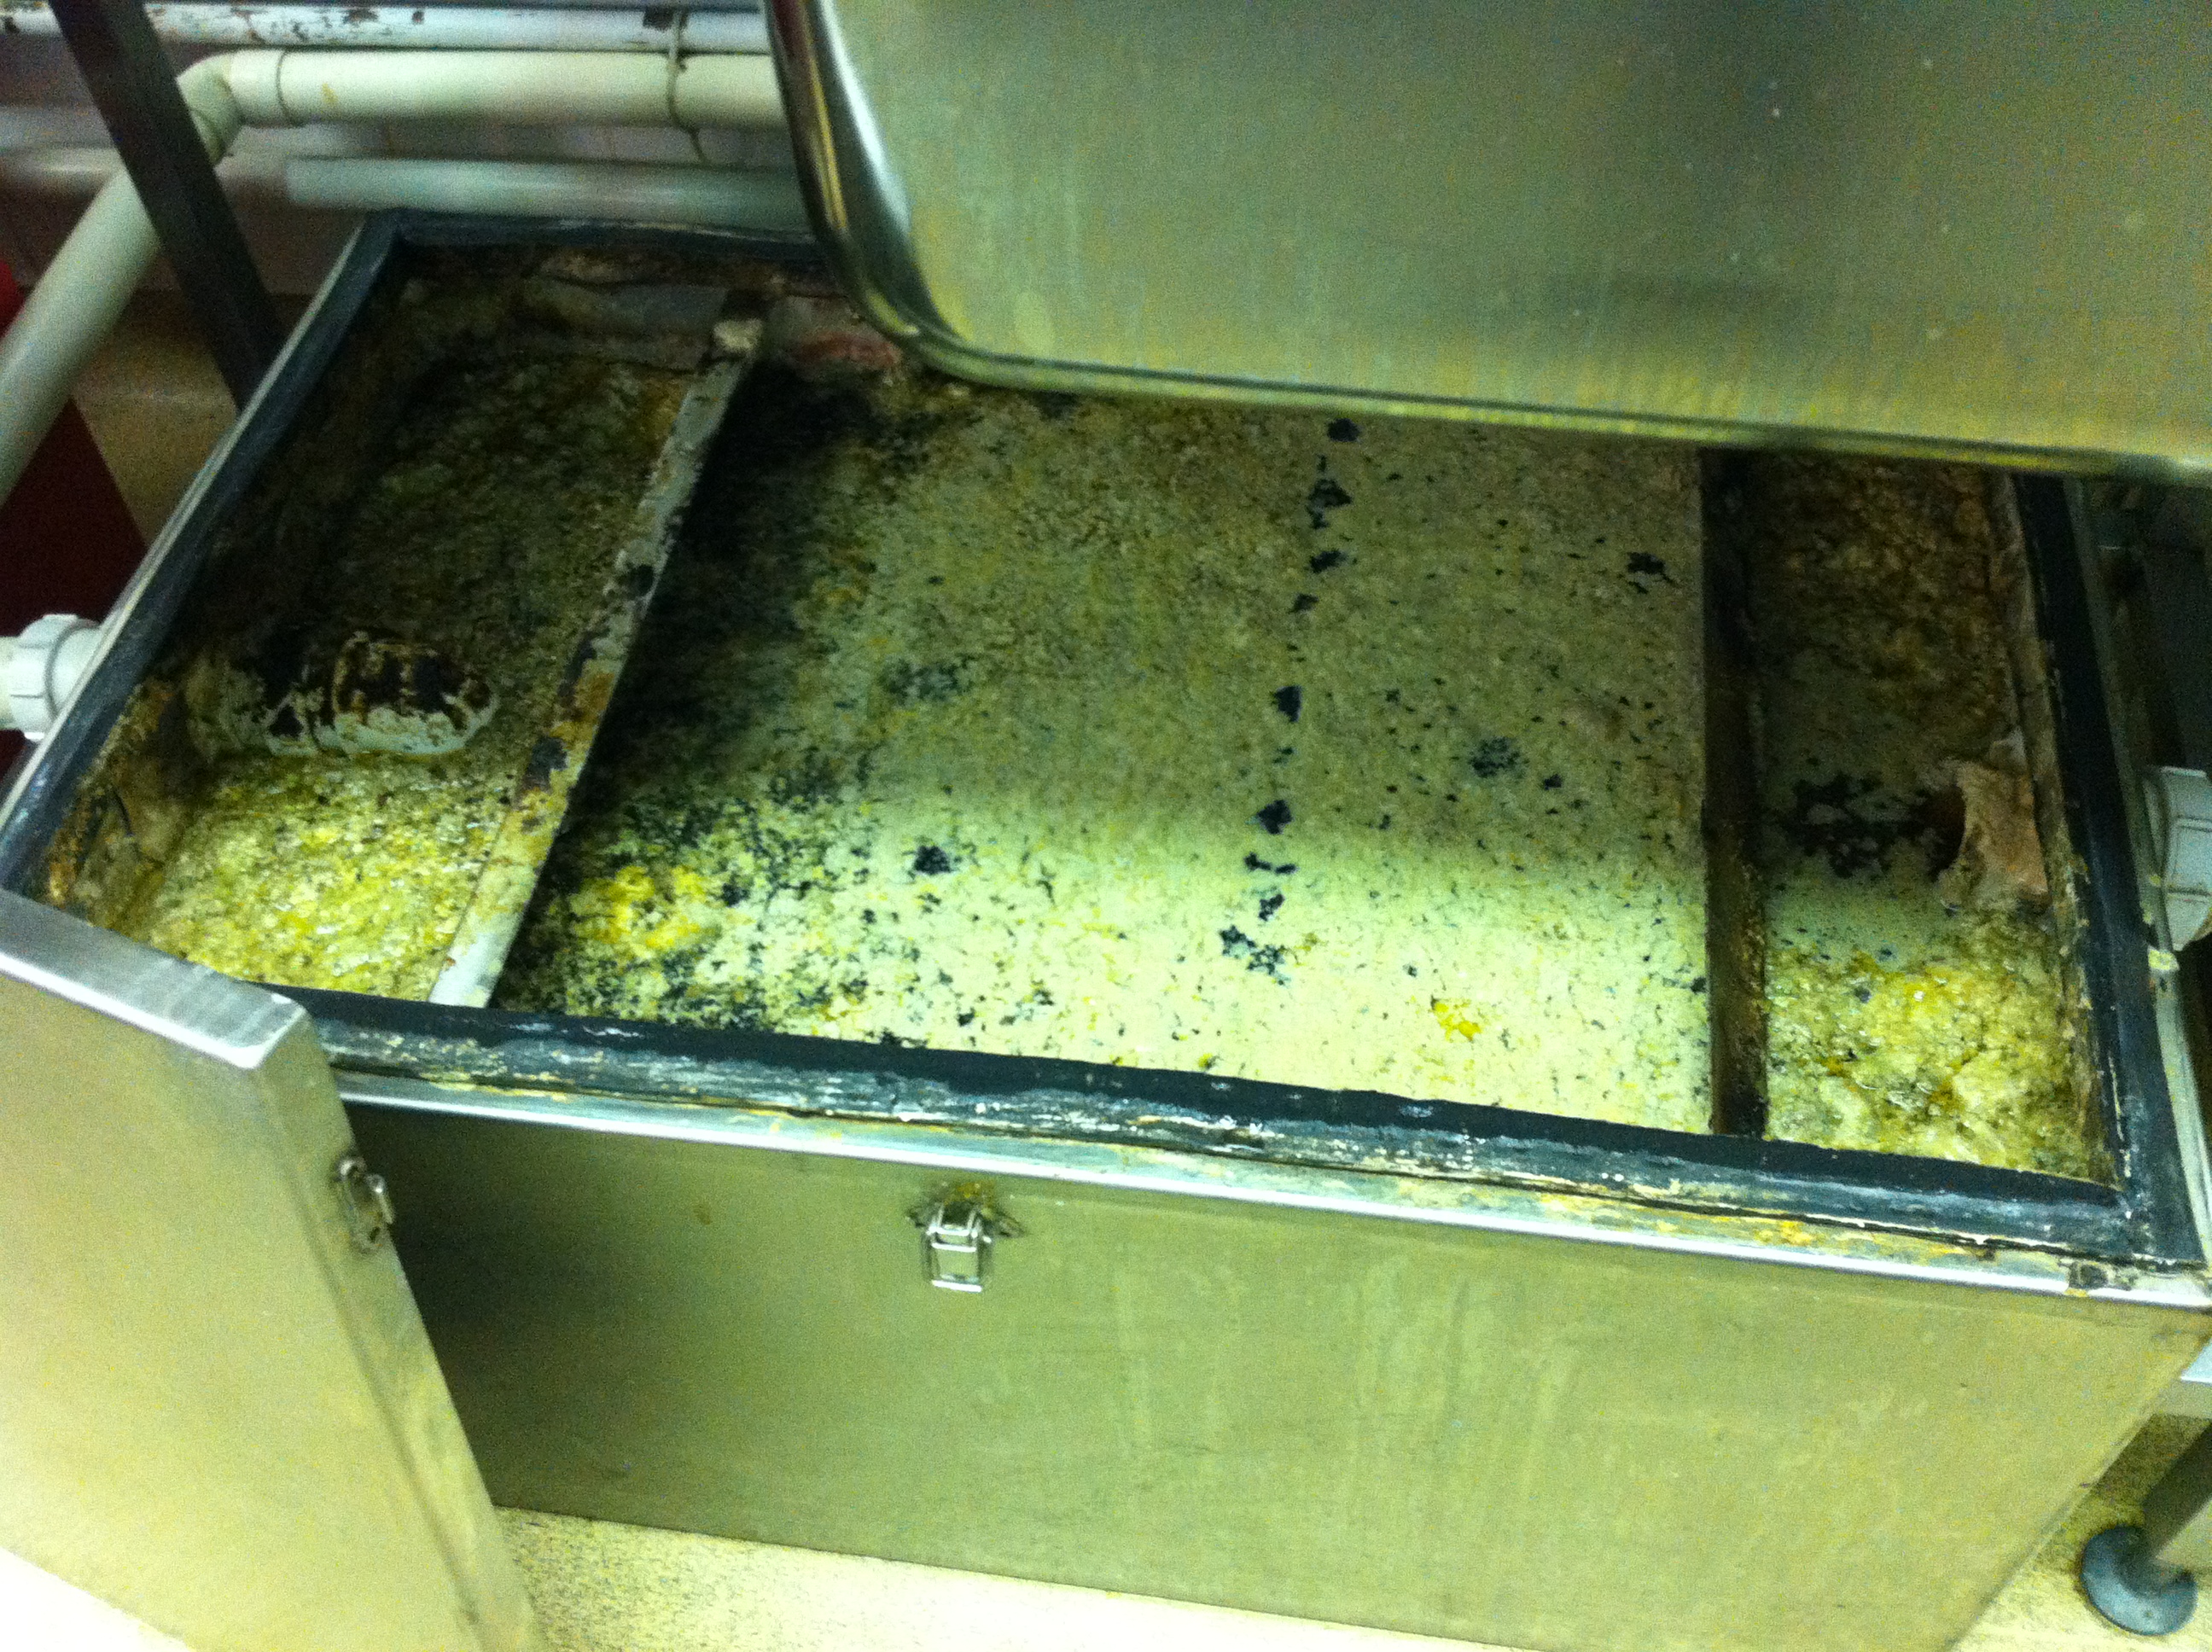 Restaurant operators need guidance on sizing and maintaining grease traps.